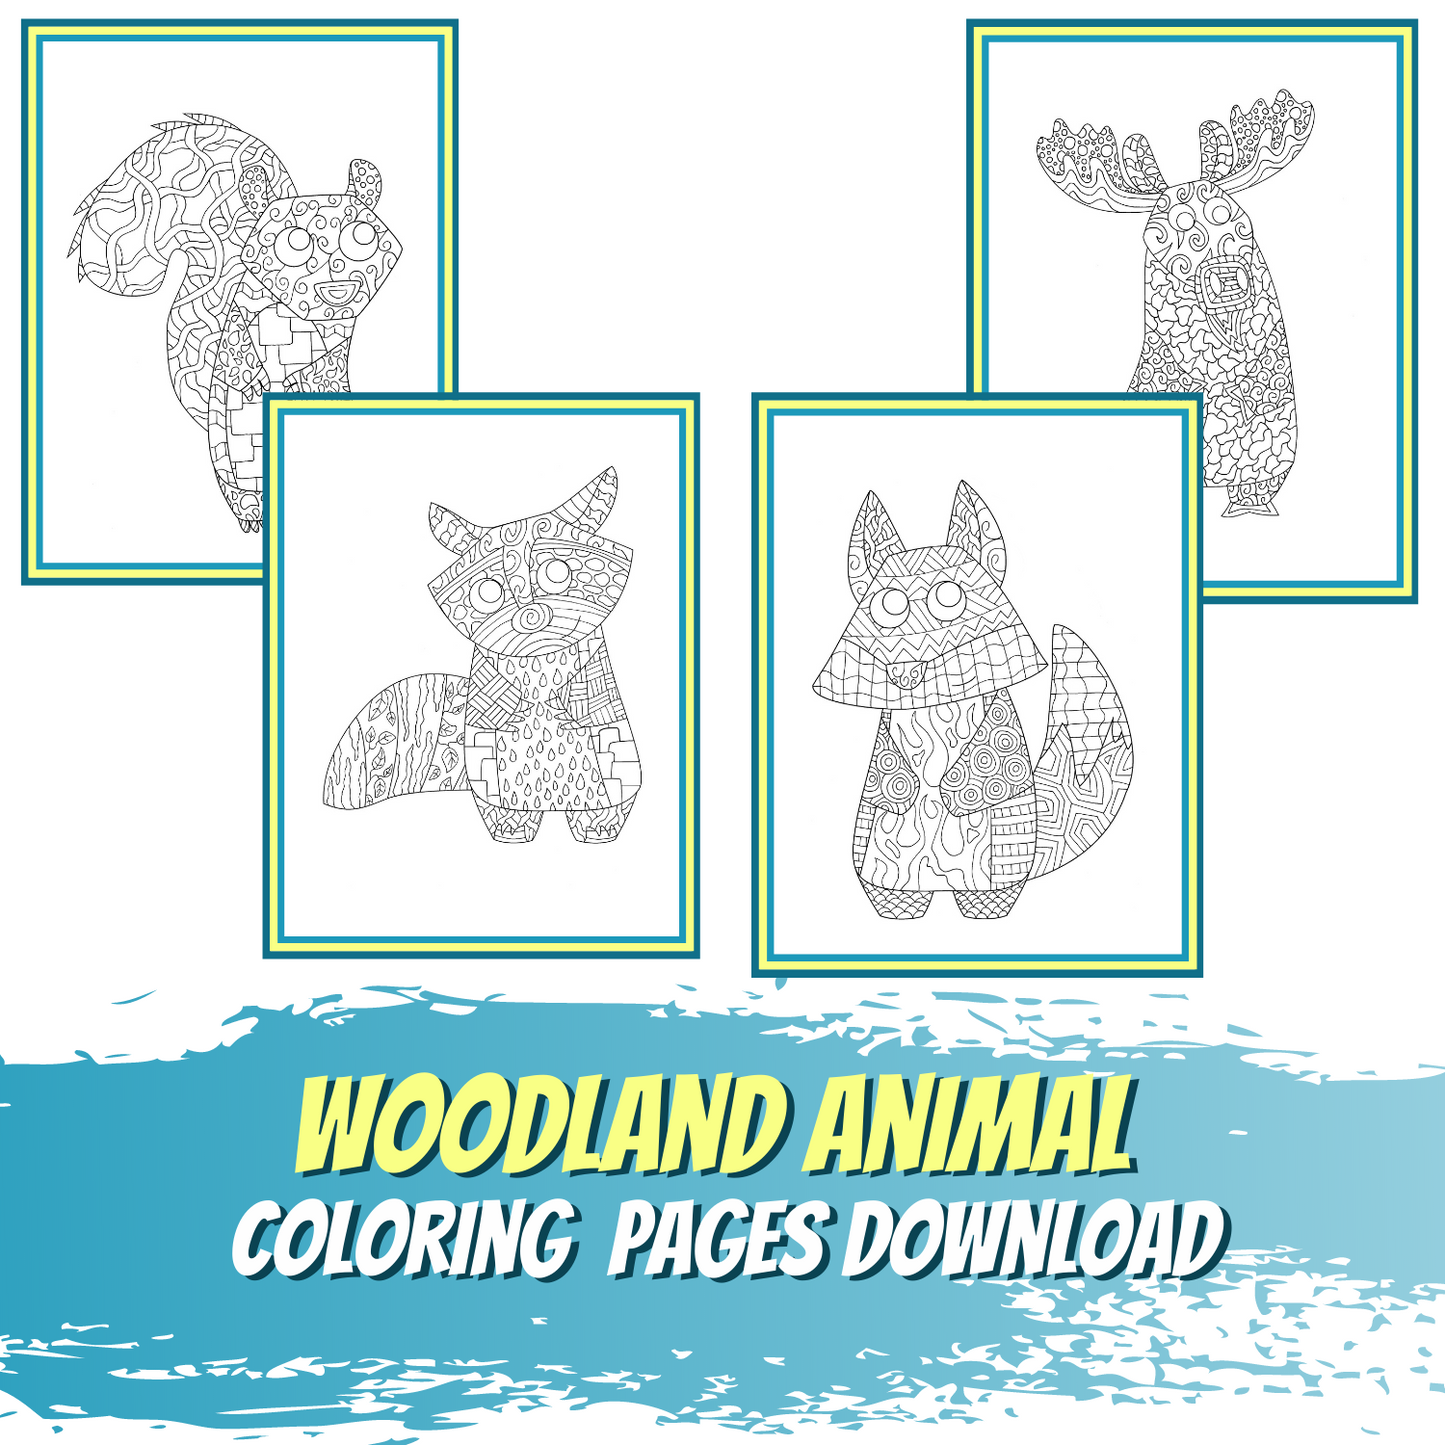 Little World of Beasts - Woodland Animal Coloring Pages - Patterns